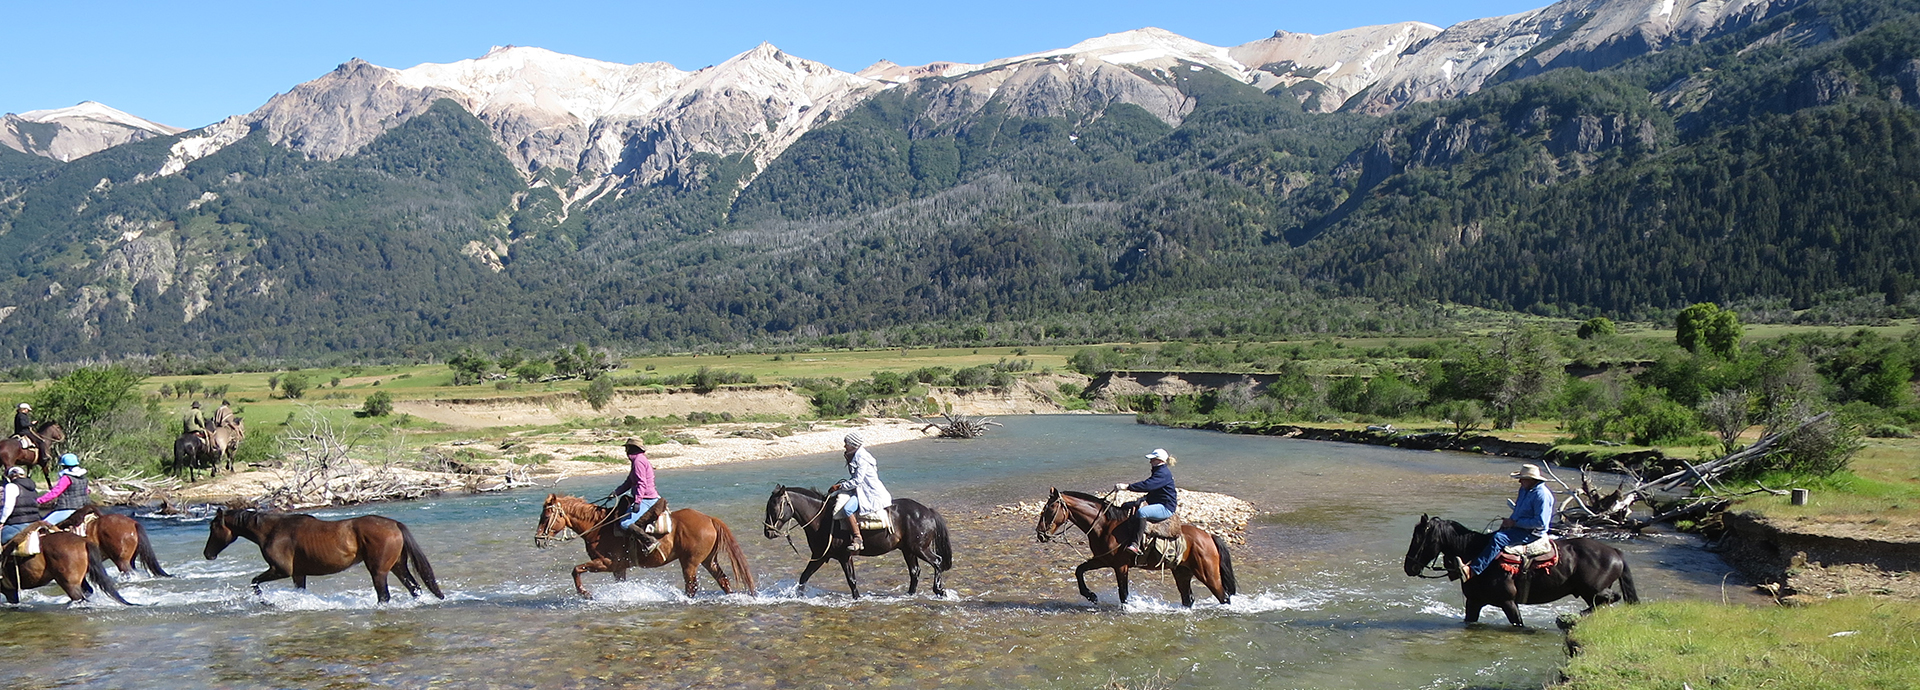 Crossing the river in Valle Tres Lagos on the Jakotango Patagonia Trail